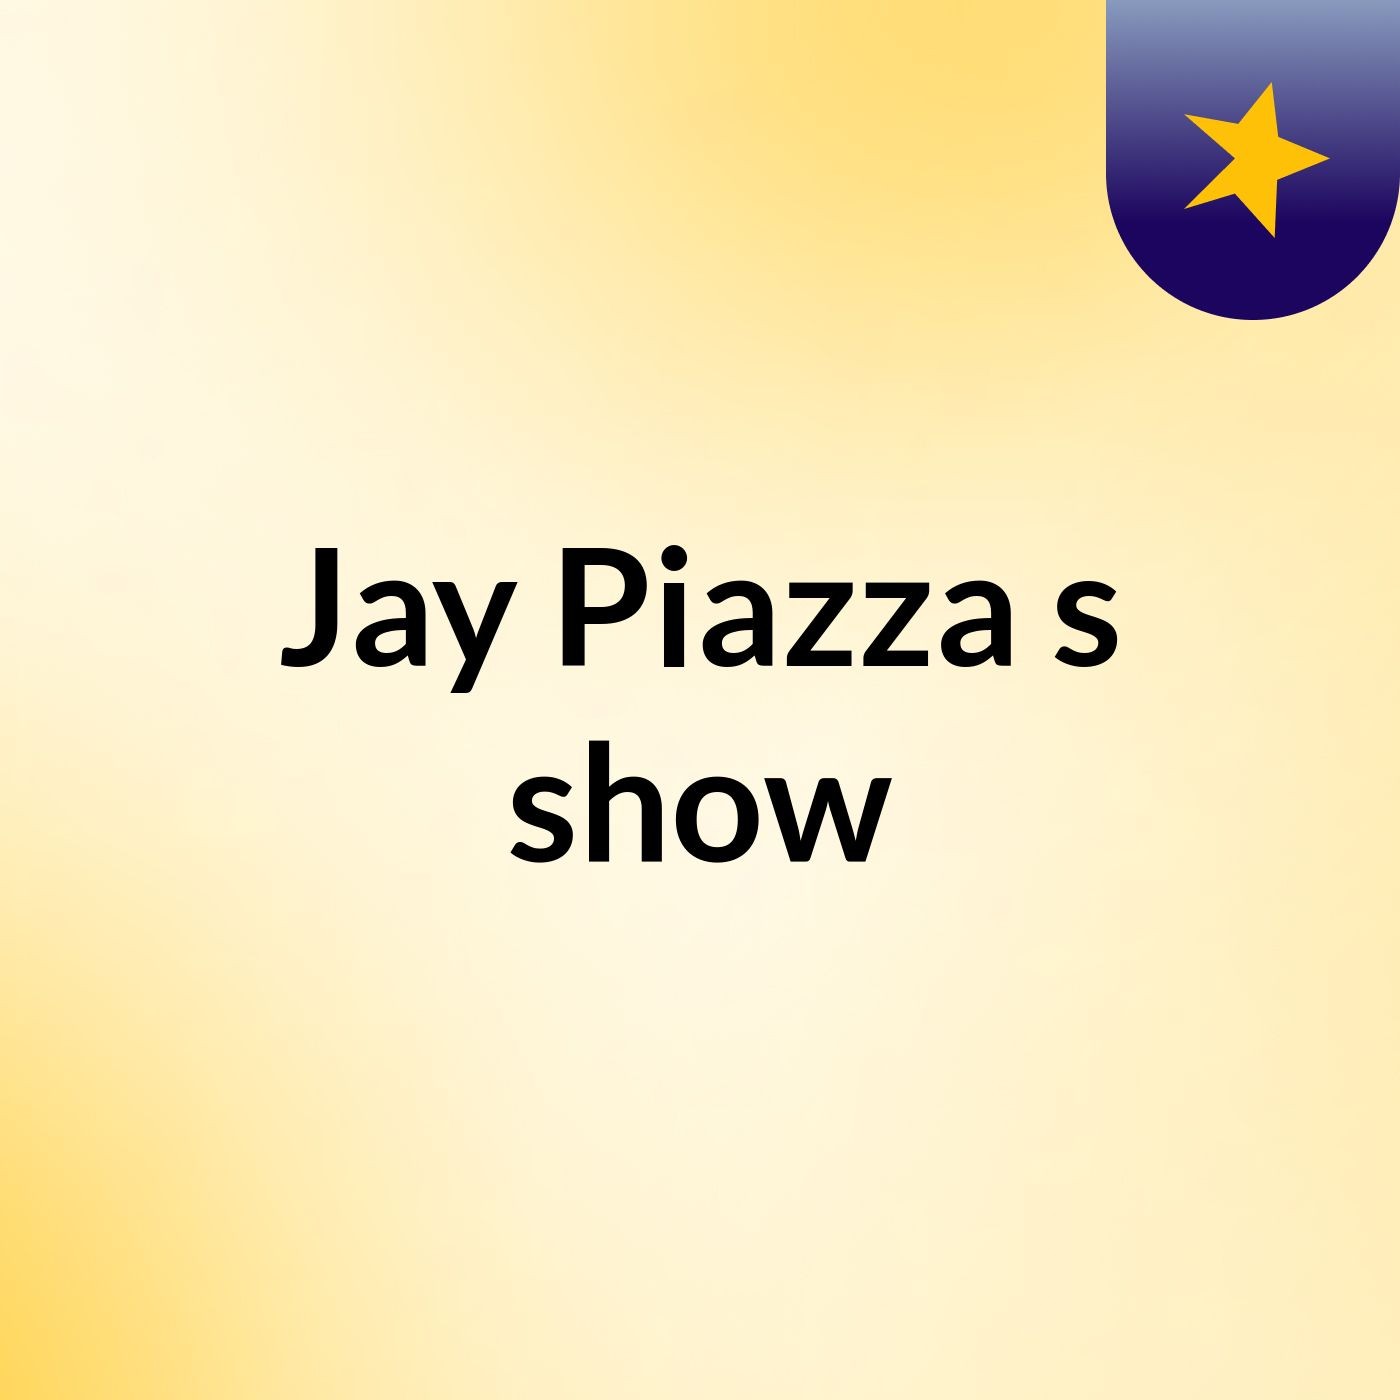 Jay Piazza's show